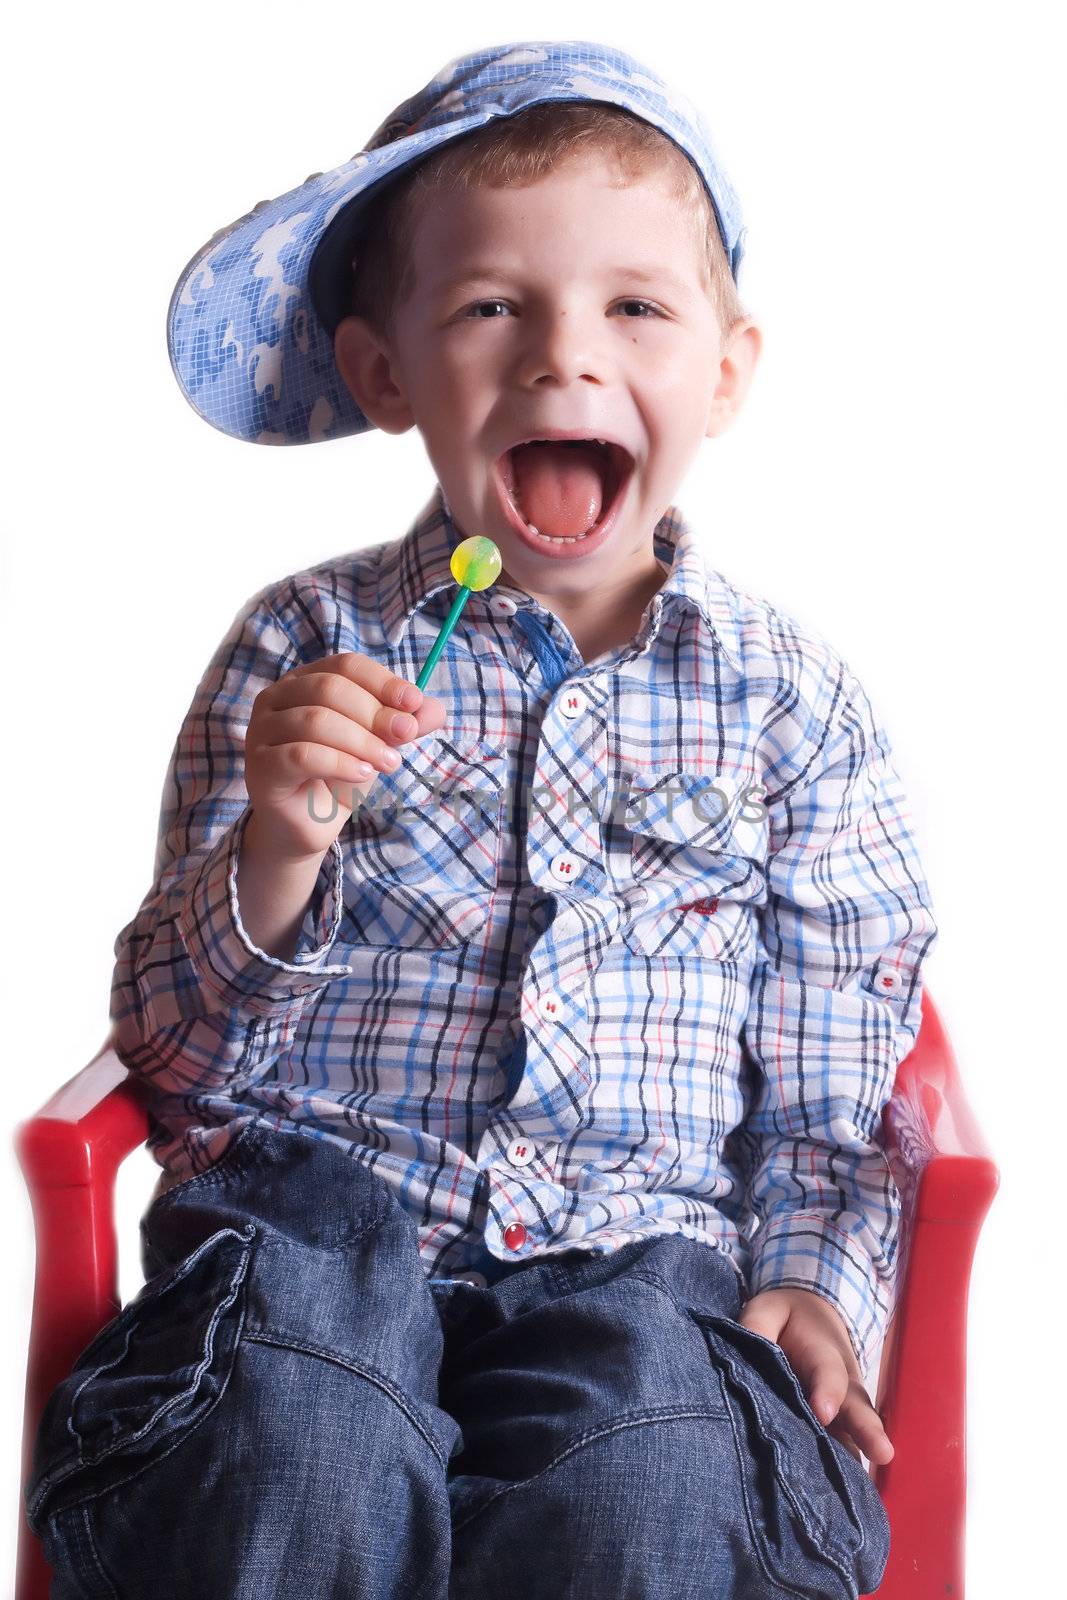 boy with an open mouth with a lollipop in his hand on a light background by victosha